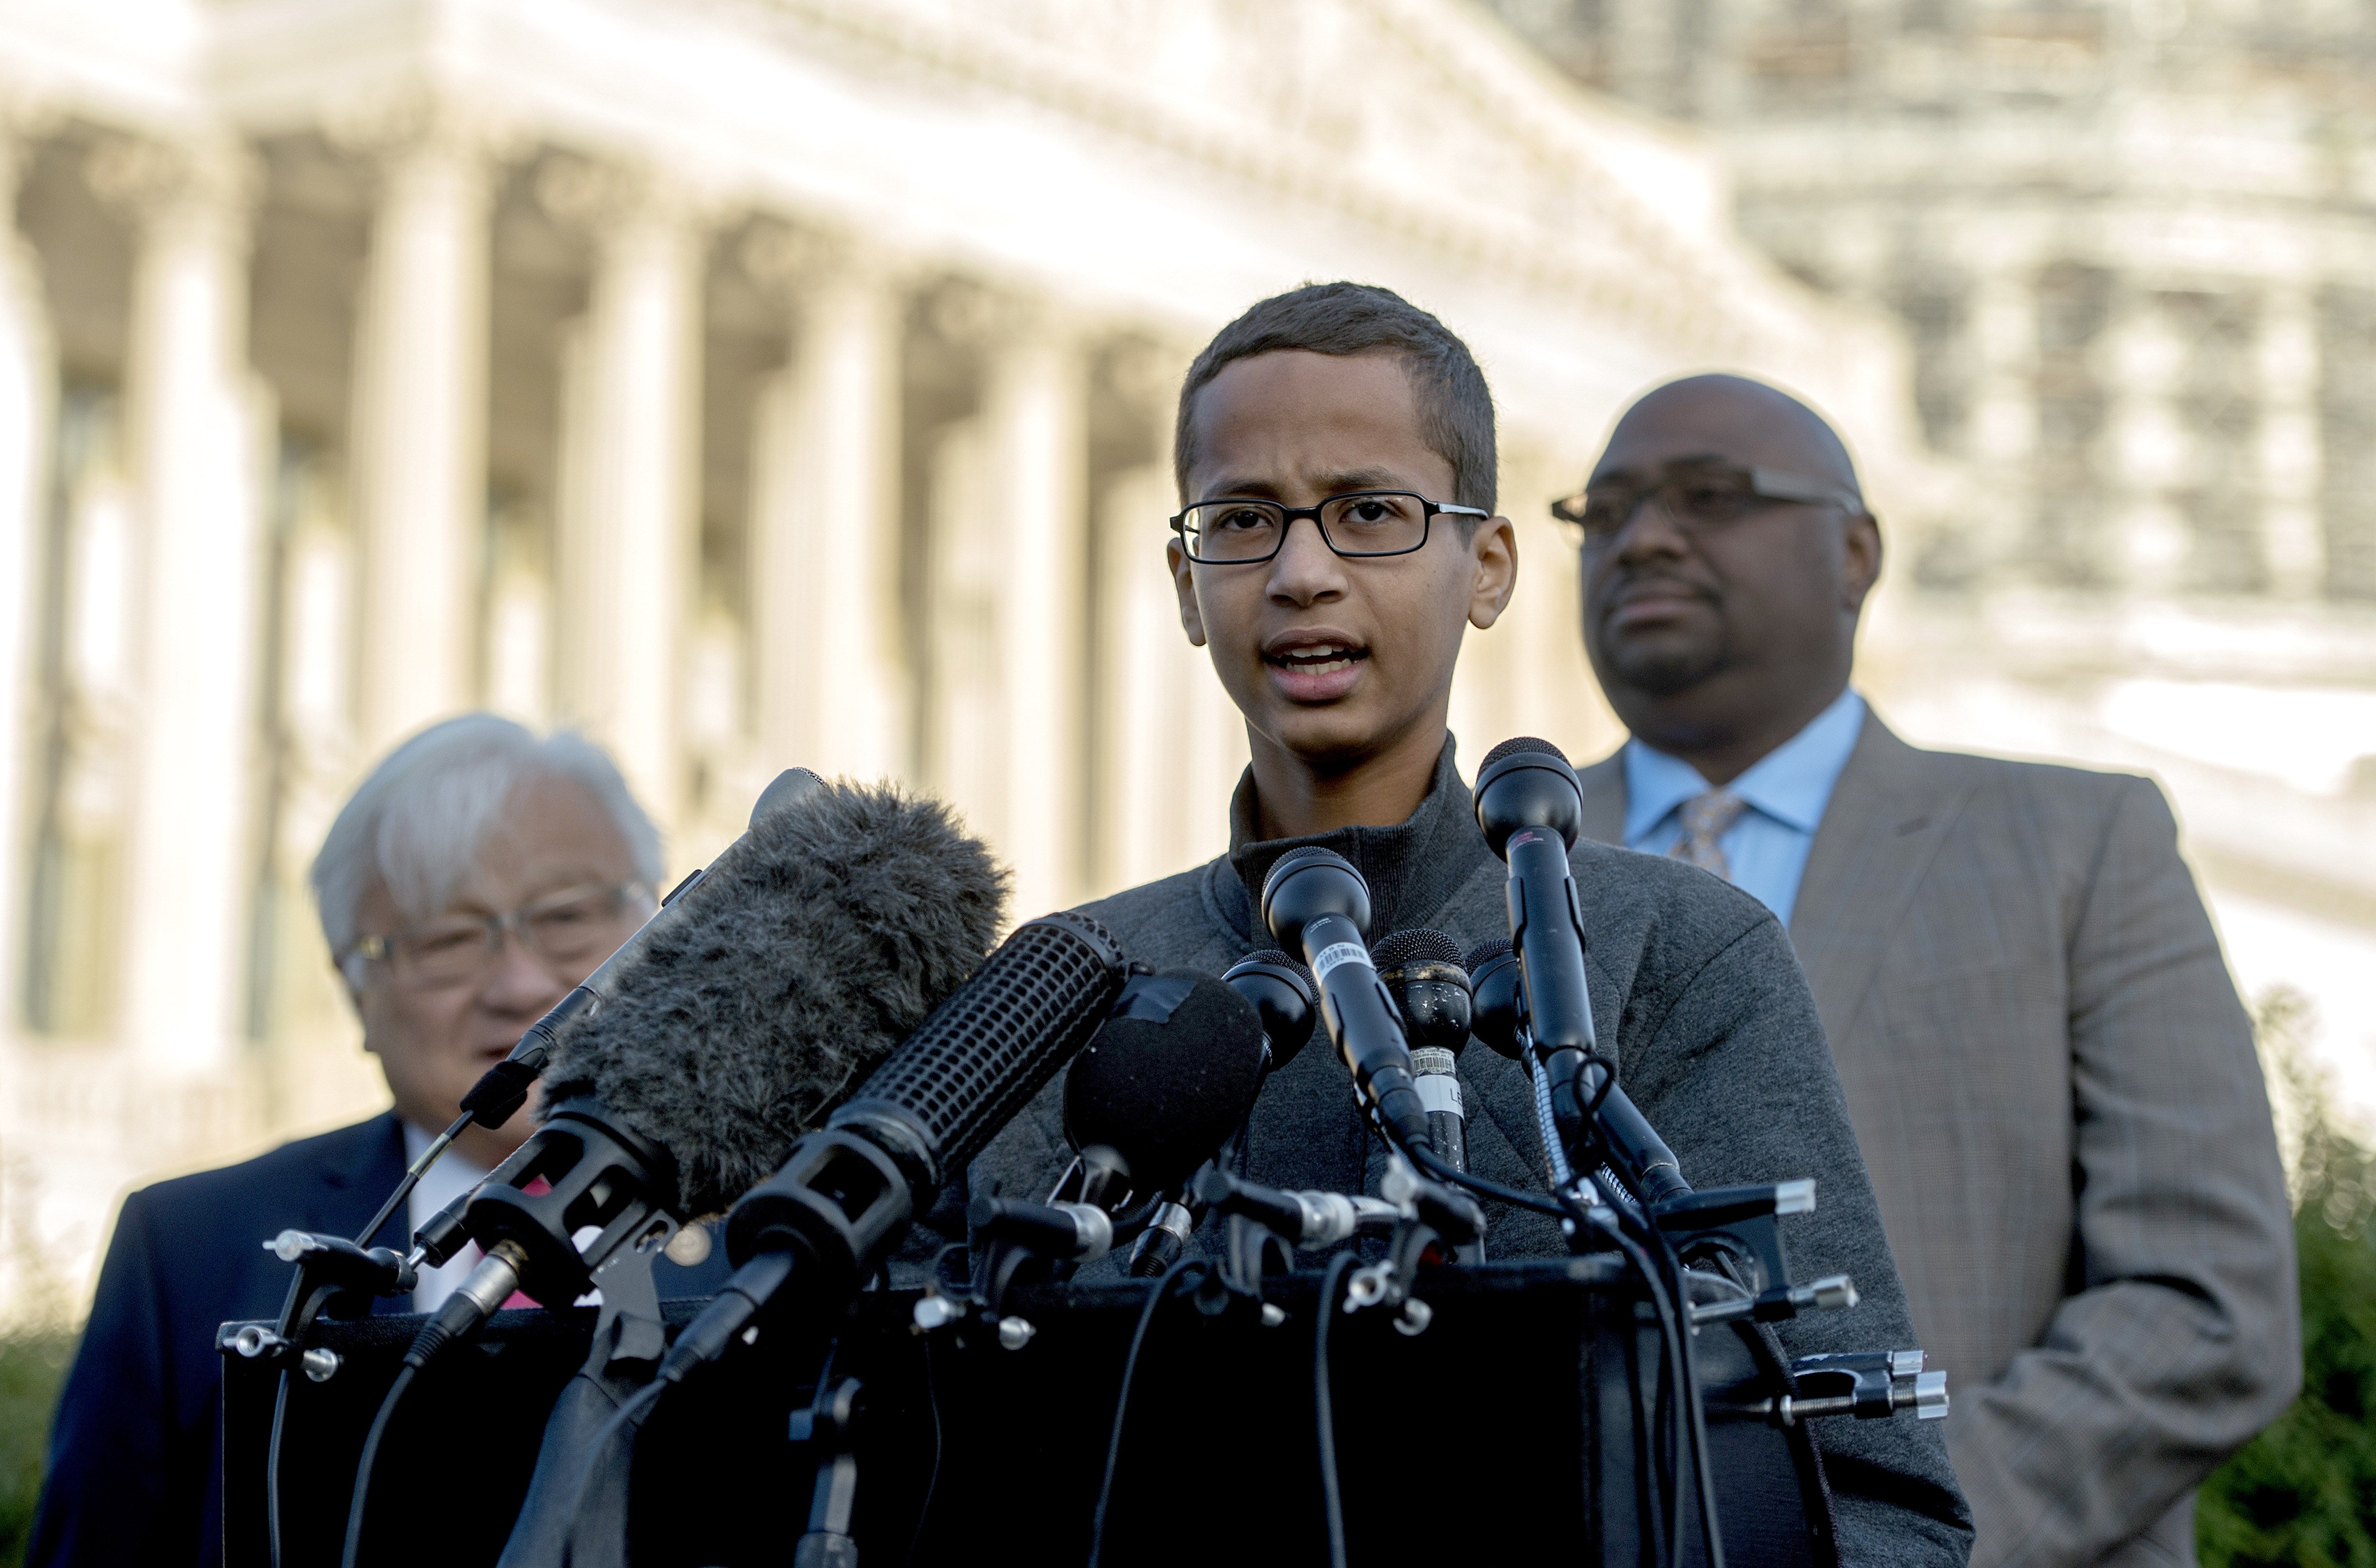 Texas Clock Teen Ahmed Mohamed Files Federal Civil Rights Lawsuit Against His Former School
